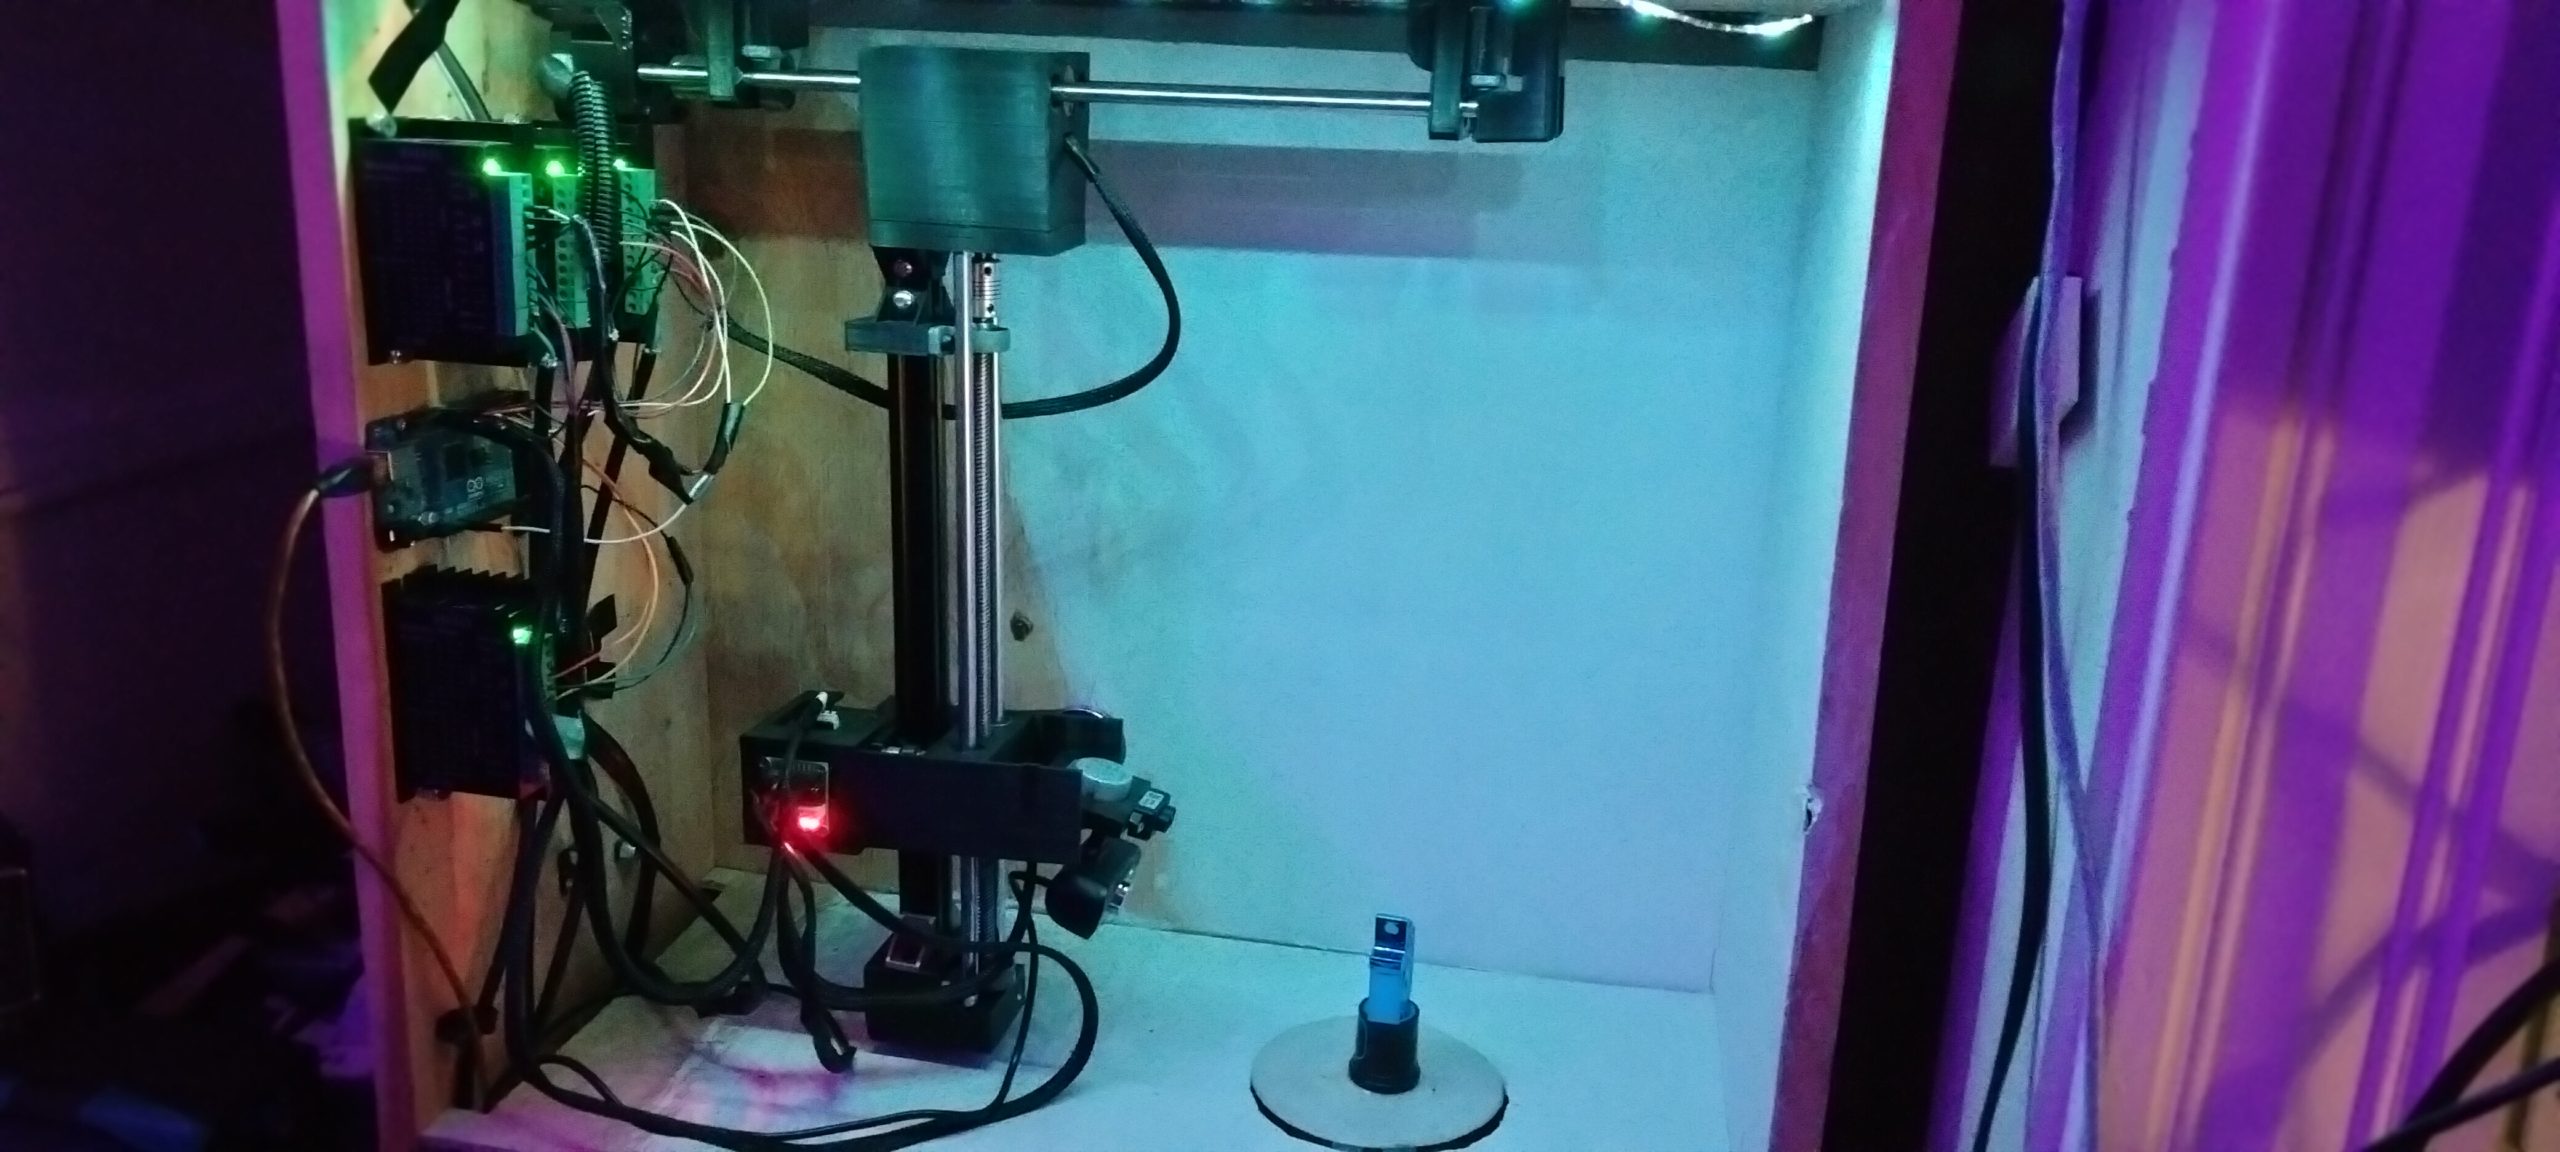 The basic rundown of my DIY Fully Automated 3D Scanner